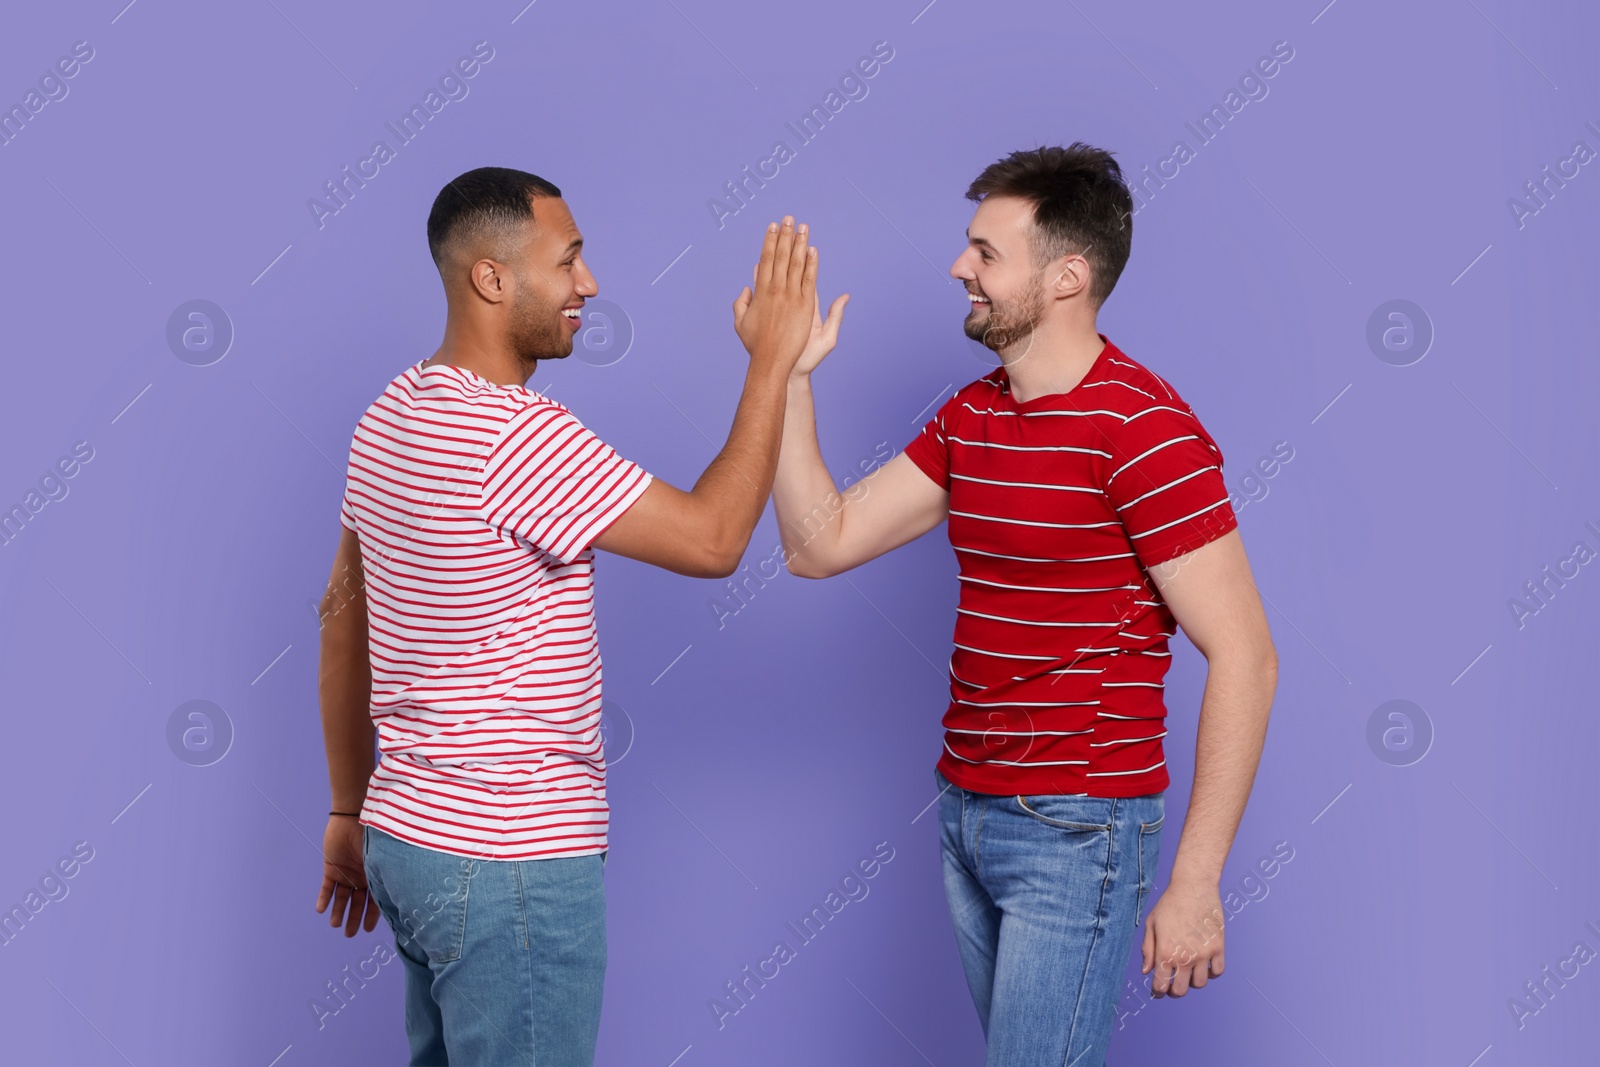 Photo of Men giving high five on purple background